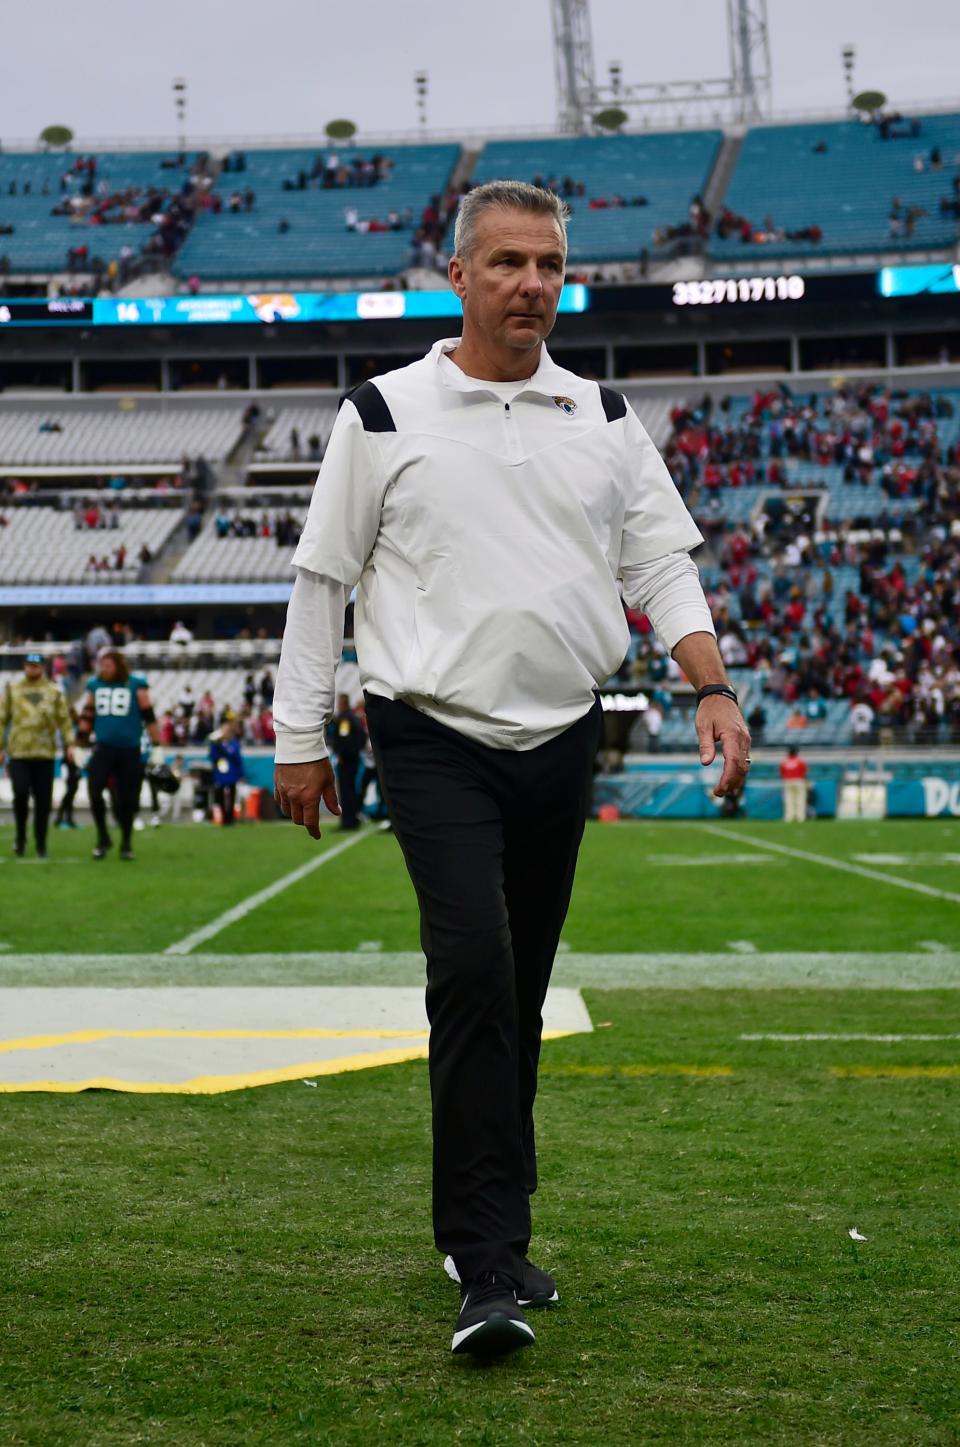 Jacksonville Jaguars head coach Urban Meyer walks off the field after the game Sunday, Nov. 28, 2021 at TIAA Bank Field in Jacksonville. The Jaguars hosted the Falcons during a regular season NFL matchup. Atlanta defeated Jacksonville 21-14. 